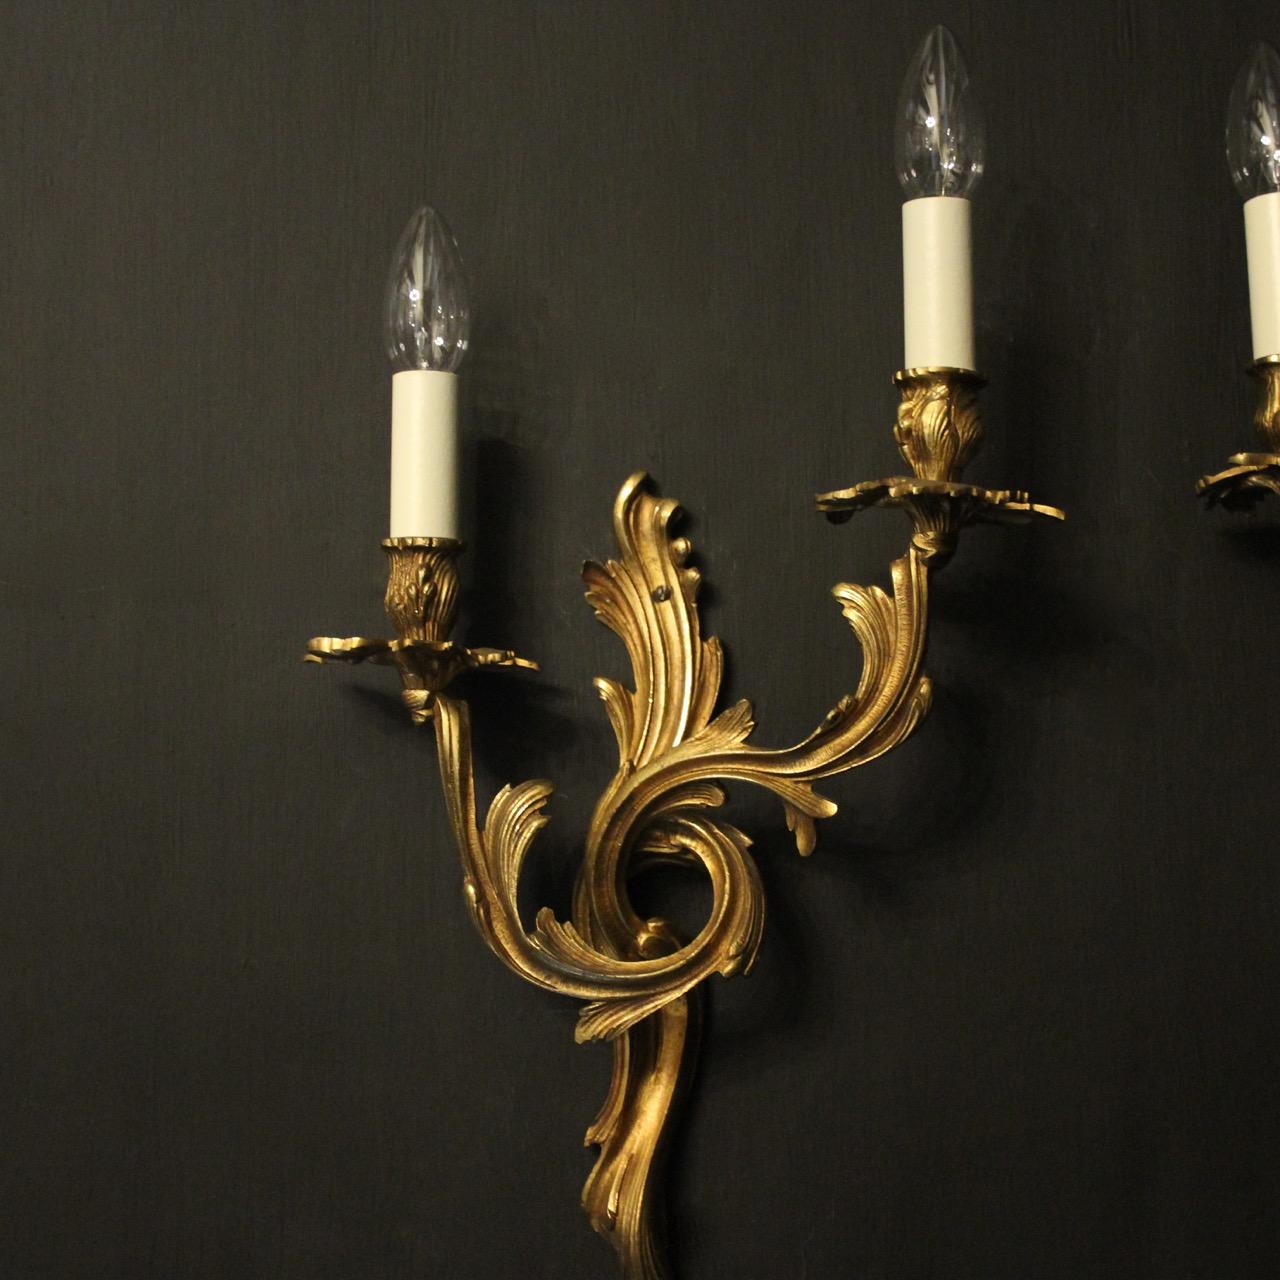 A French pair of gilded bronze twin arm opposing antique wall sconces, the leaf scrolling arms with leaf bobeche drip pans and bulbous candle sconces, issuing from a decoratively cast opposing leaf backplate, good original color and nice crisp